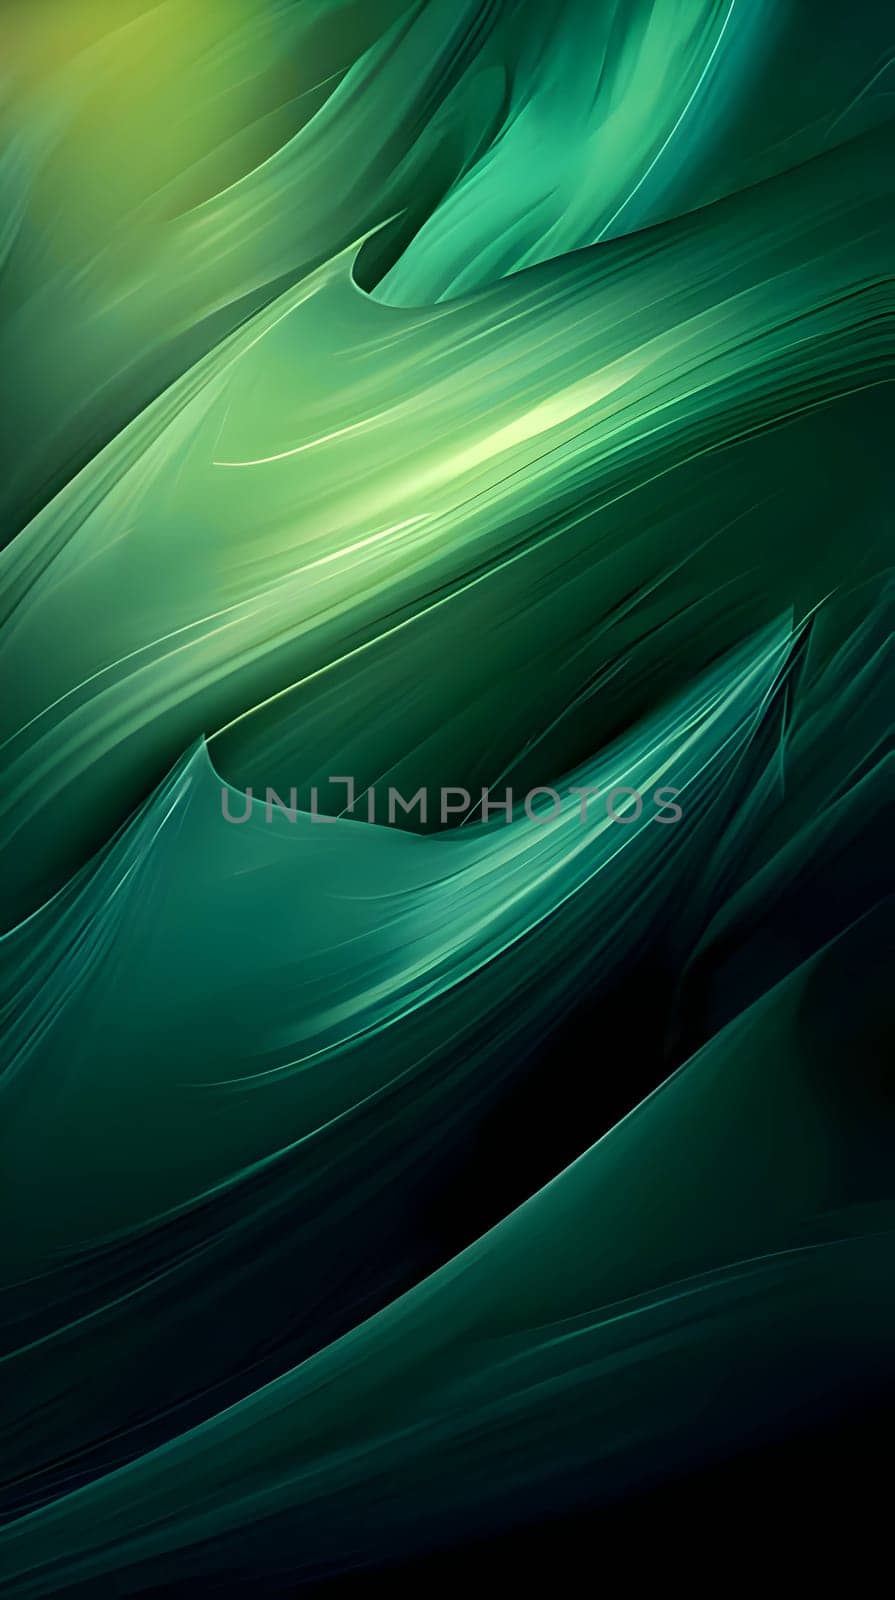 Neon green waves as abstract background wallpaper. by ThemesS